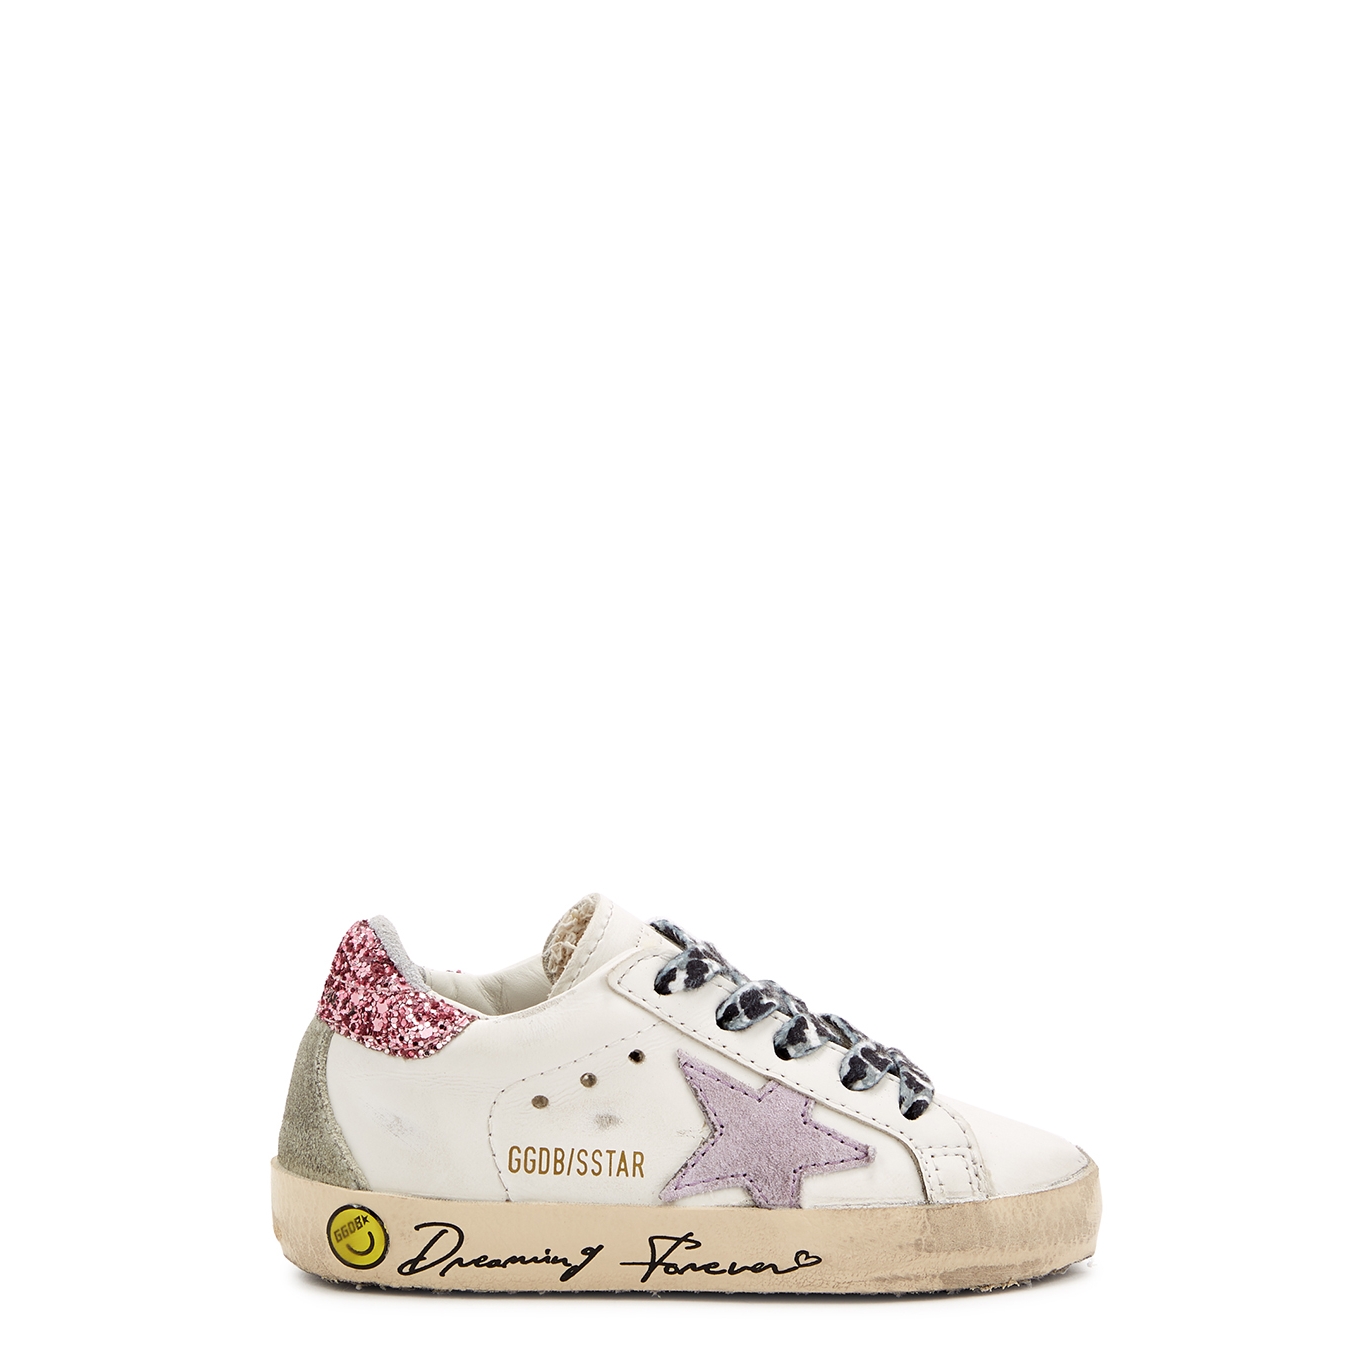 Golden Goose Kids Superstar Distressed Leather Sneakers - Multicoloured - 7 Baby